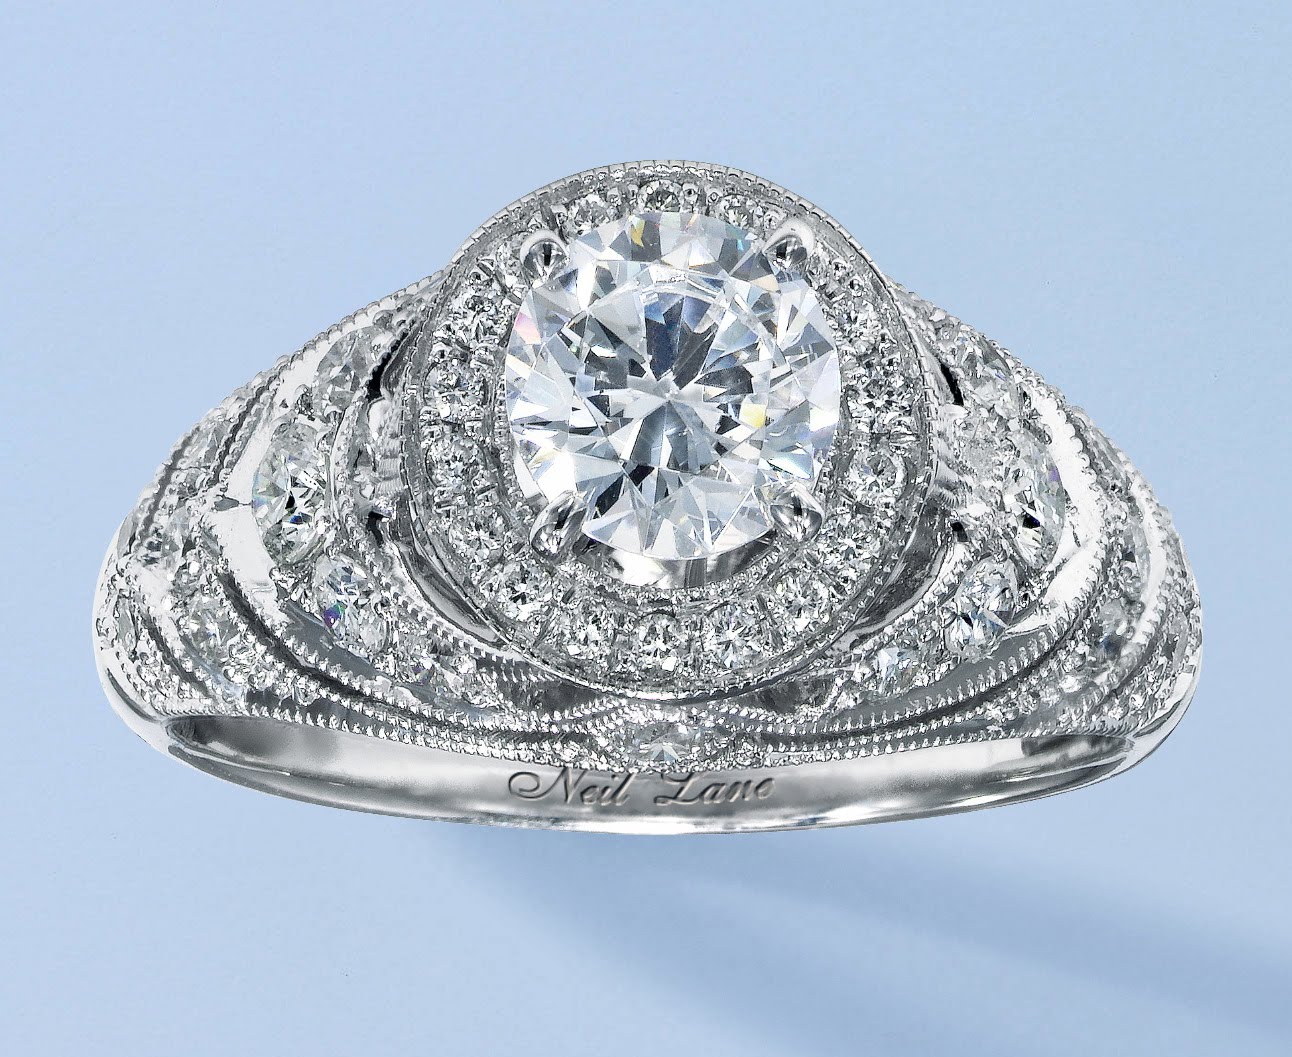 Neil Lane Creates Bridal Collection for Kay Jewelers